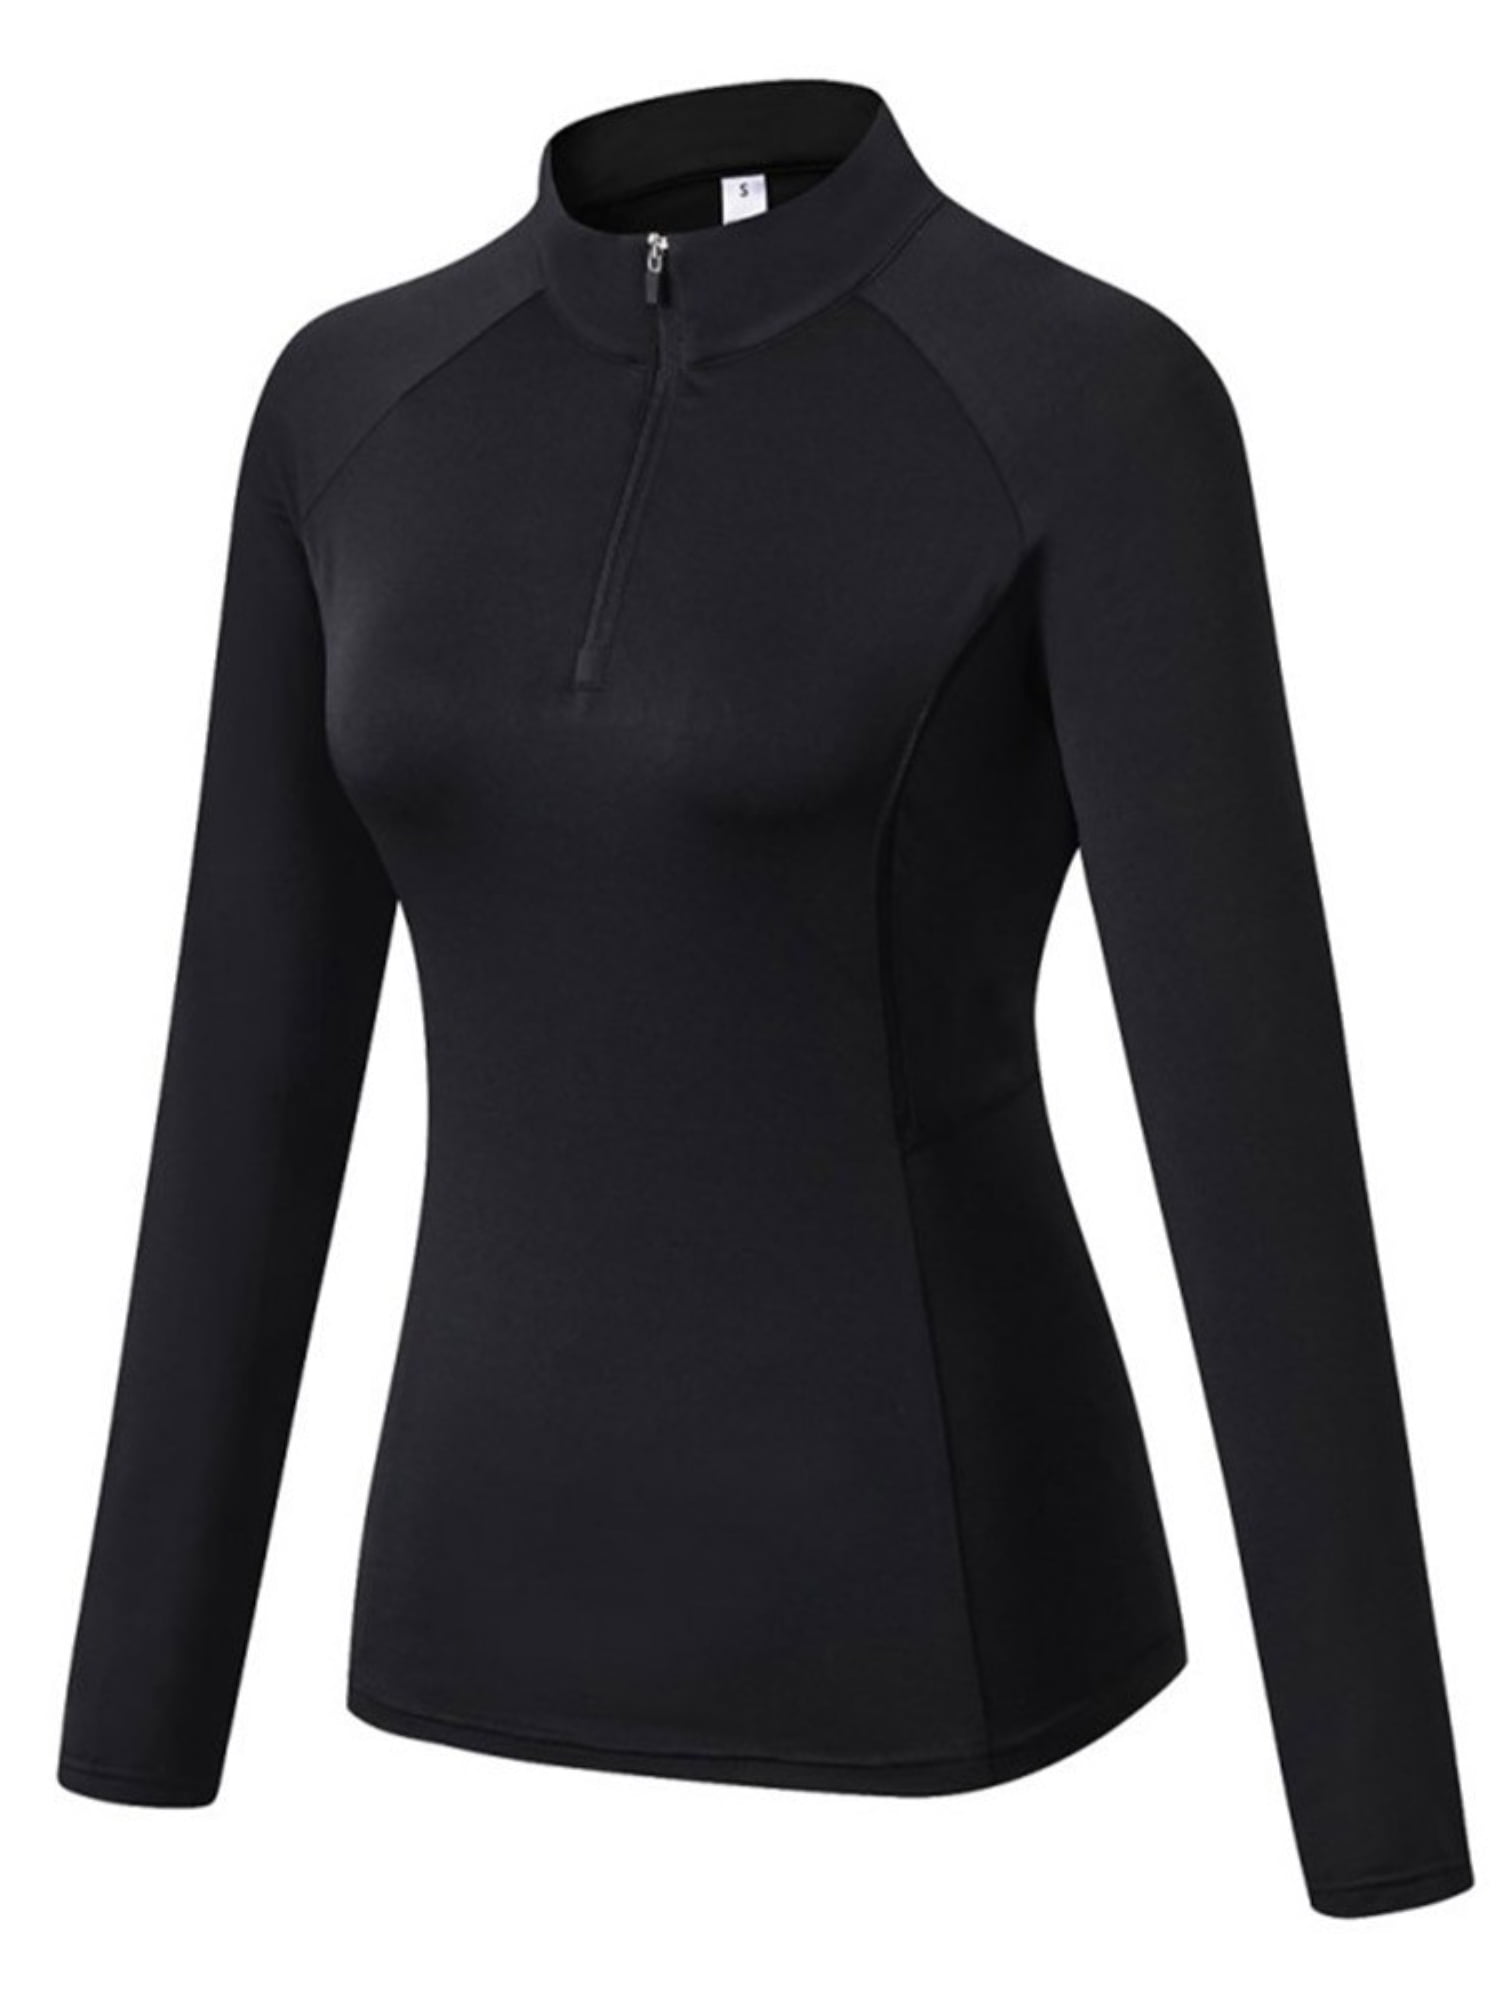  NOOZ Women's Dry Fit Athletic Fleece Lined Thermal Compression Long  Sleeve T Shirt - Black, X-Small (Labeled S) : Clothing, Shoes & Jewelry